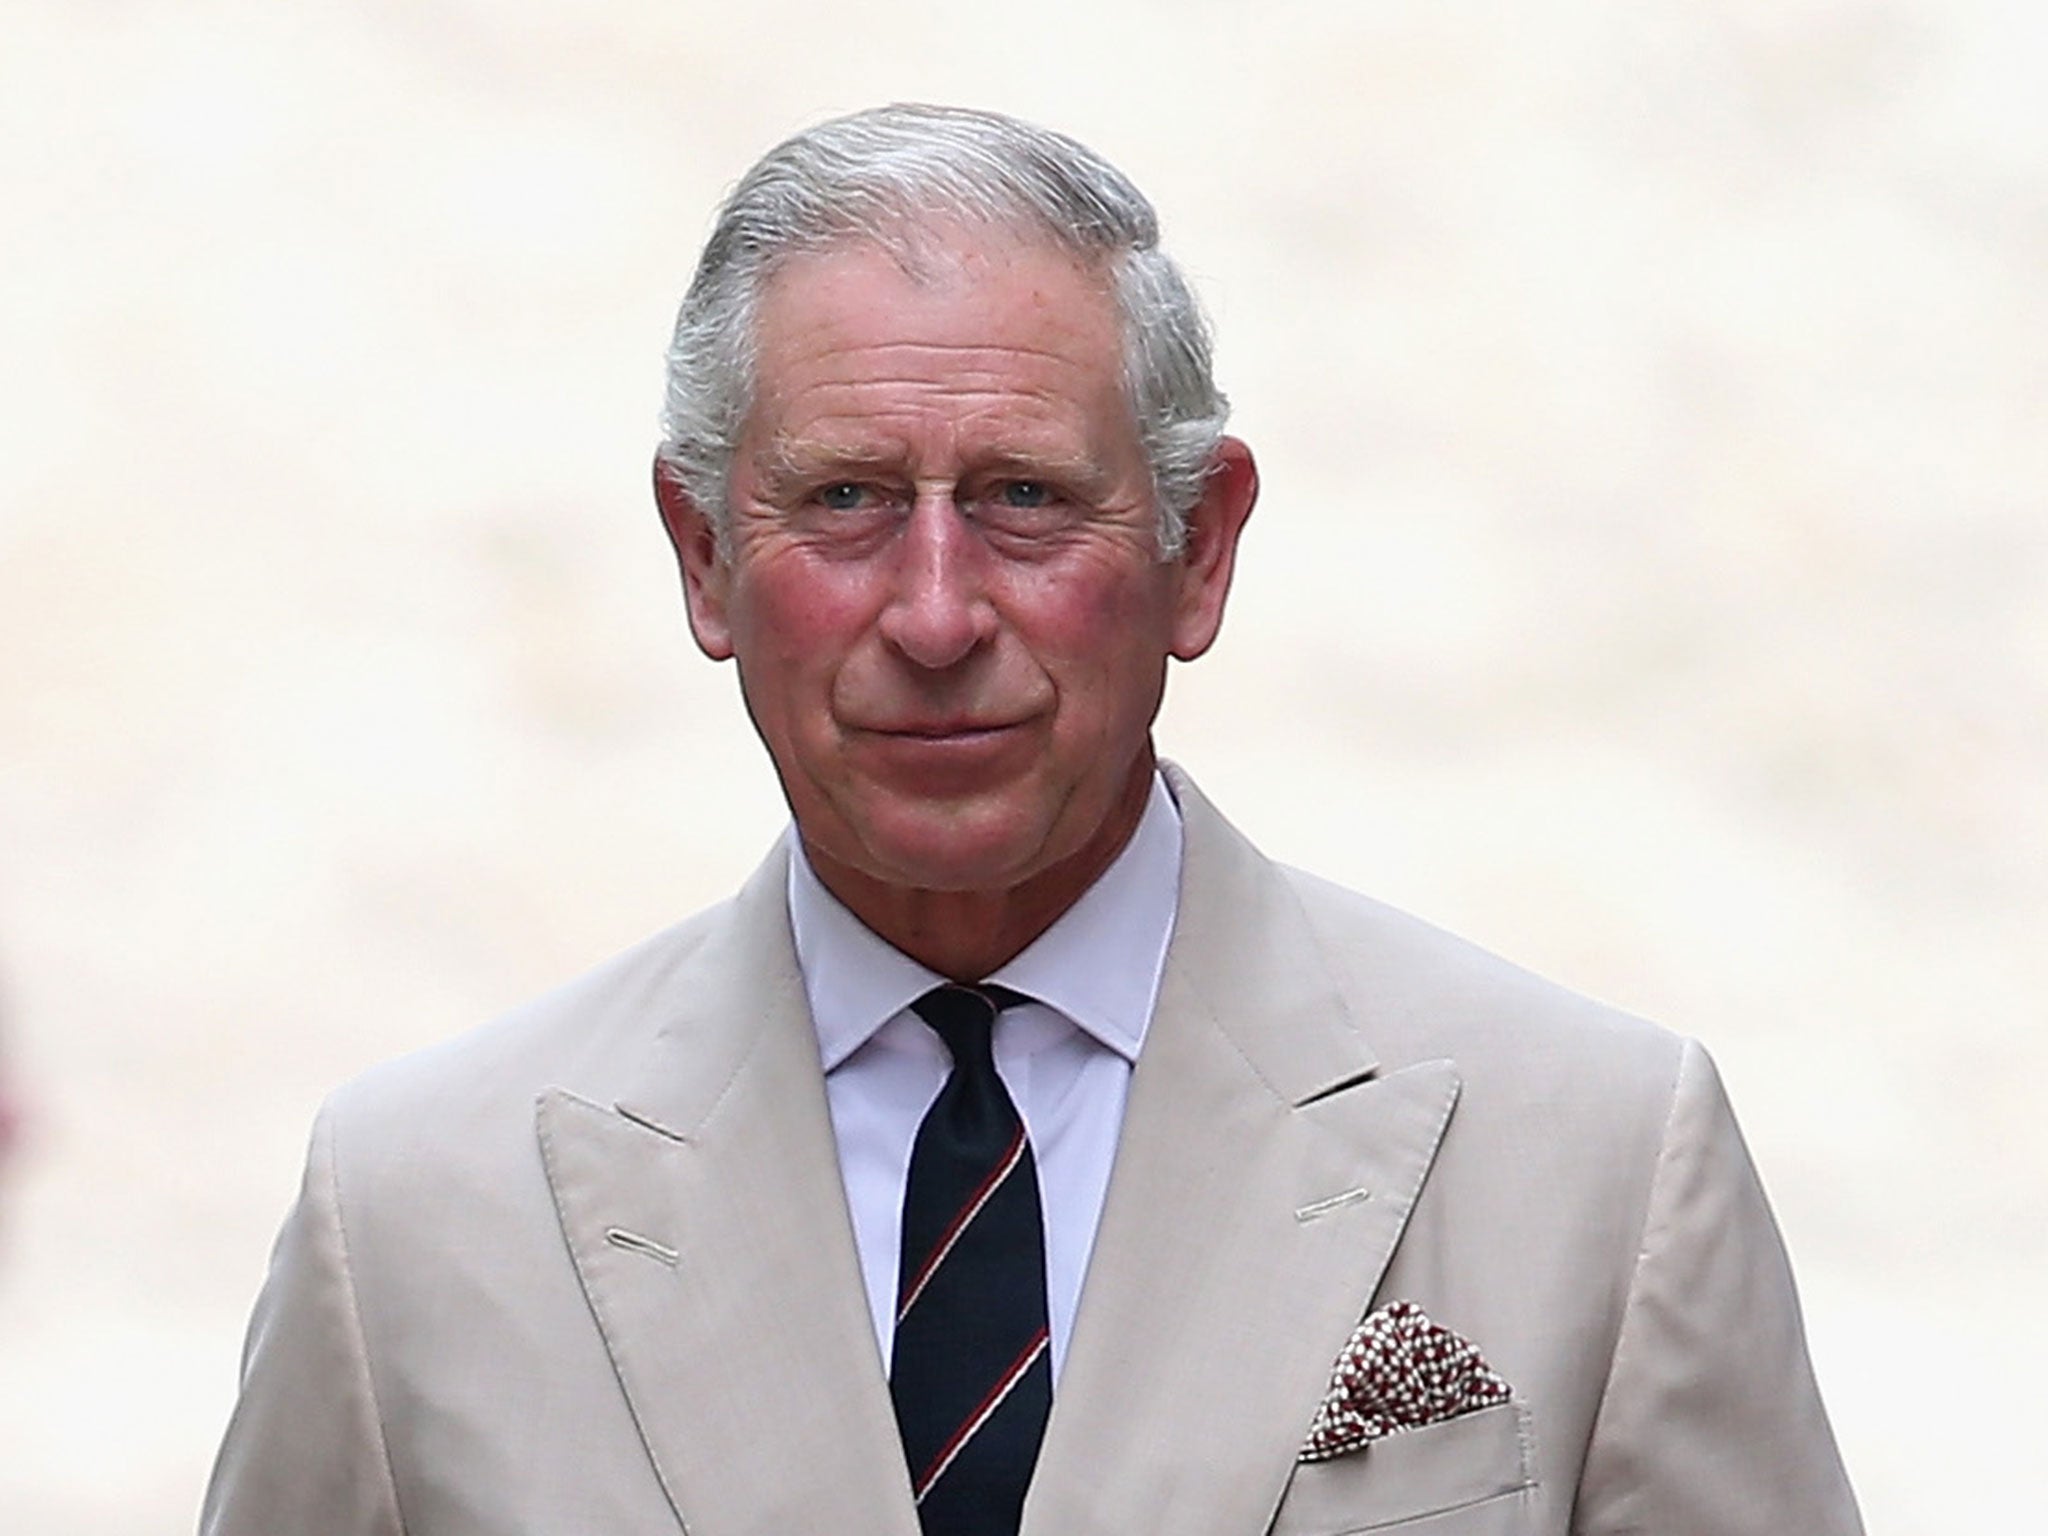 Prince Charles has said that religious leaders ensure followers respect other faiths